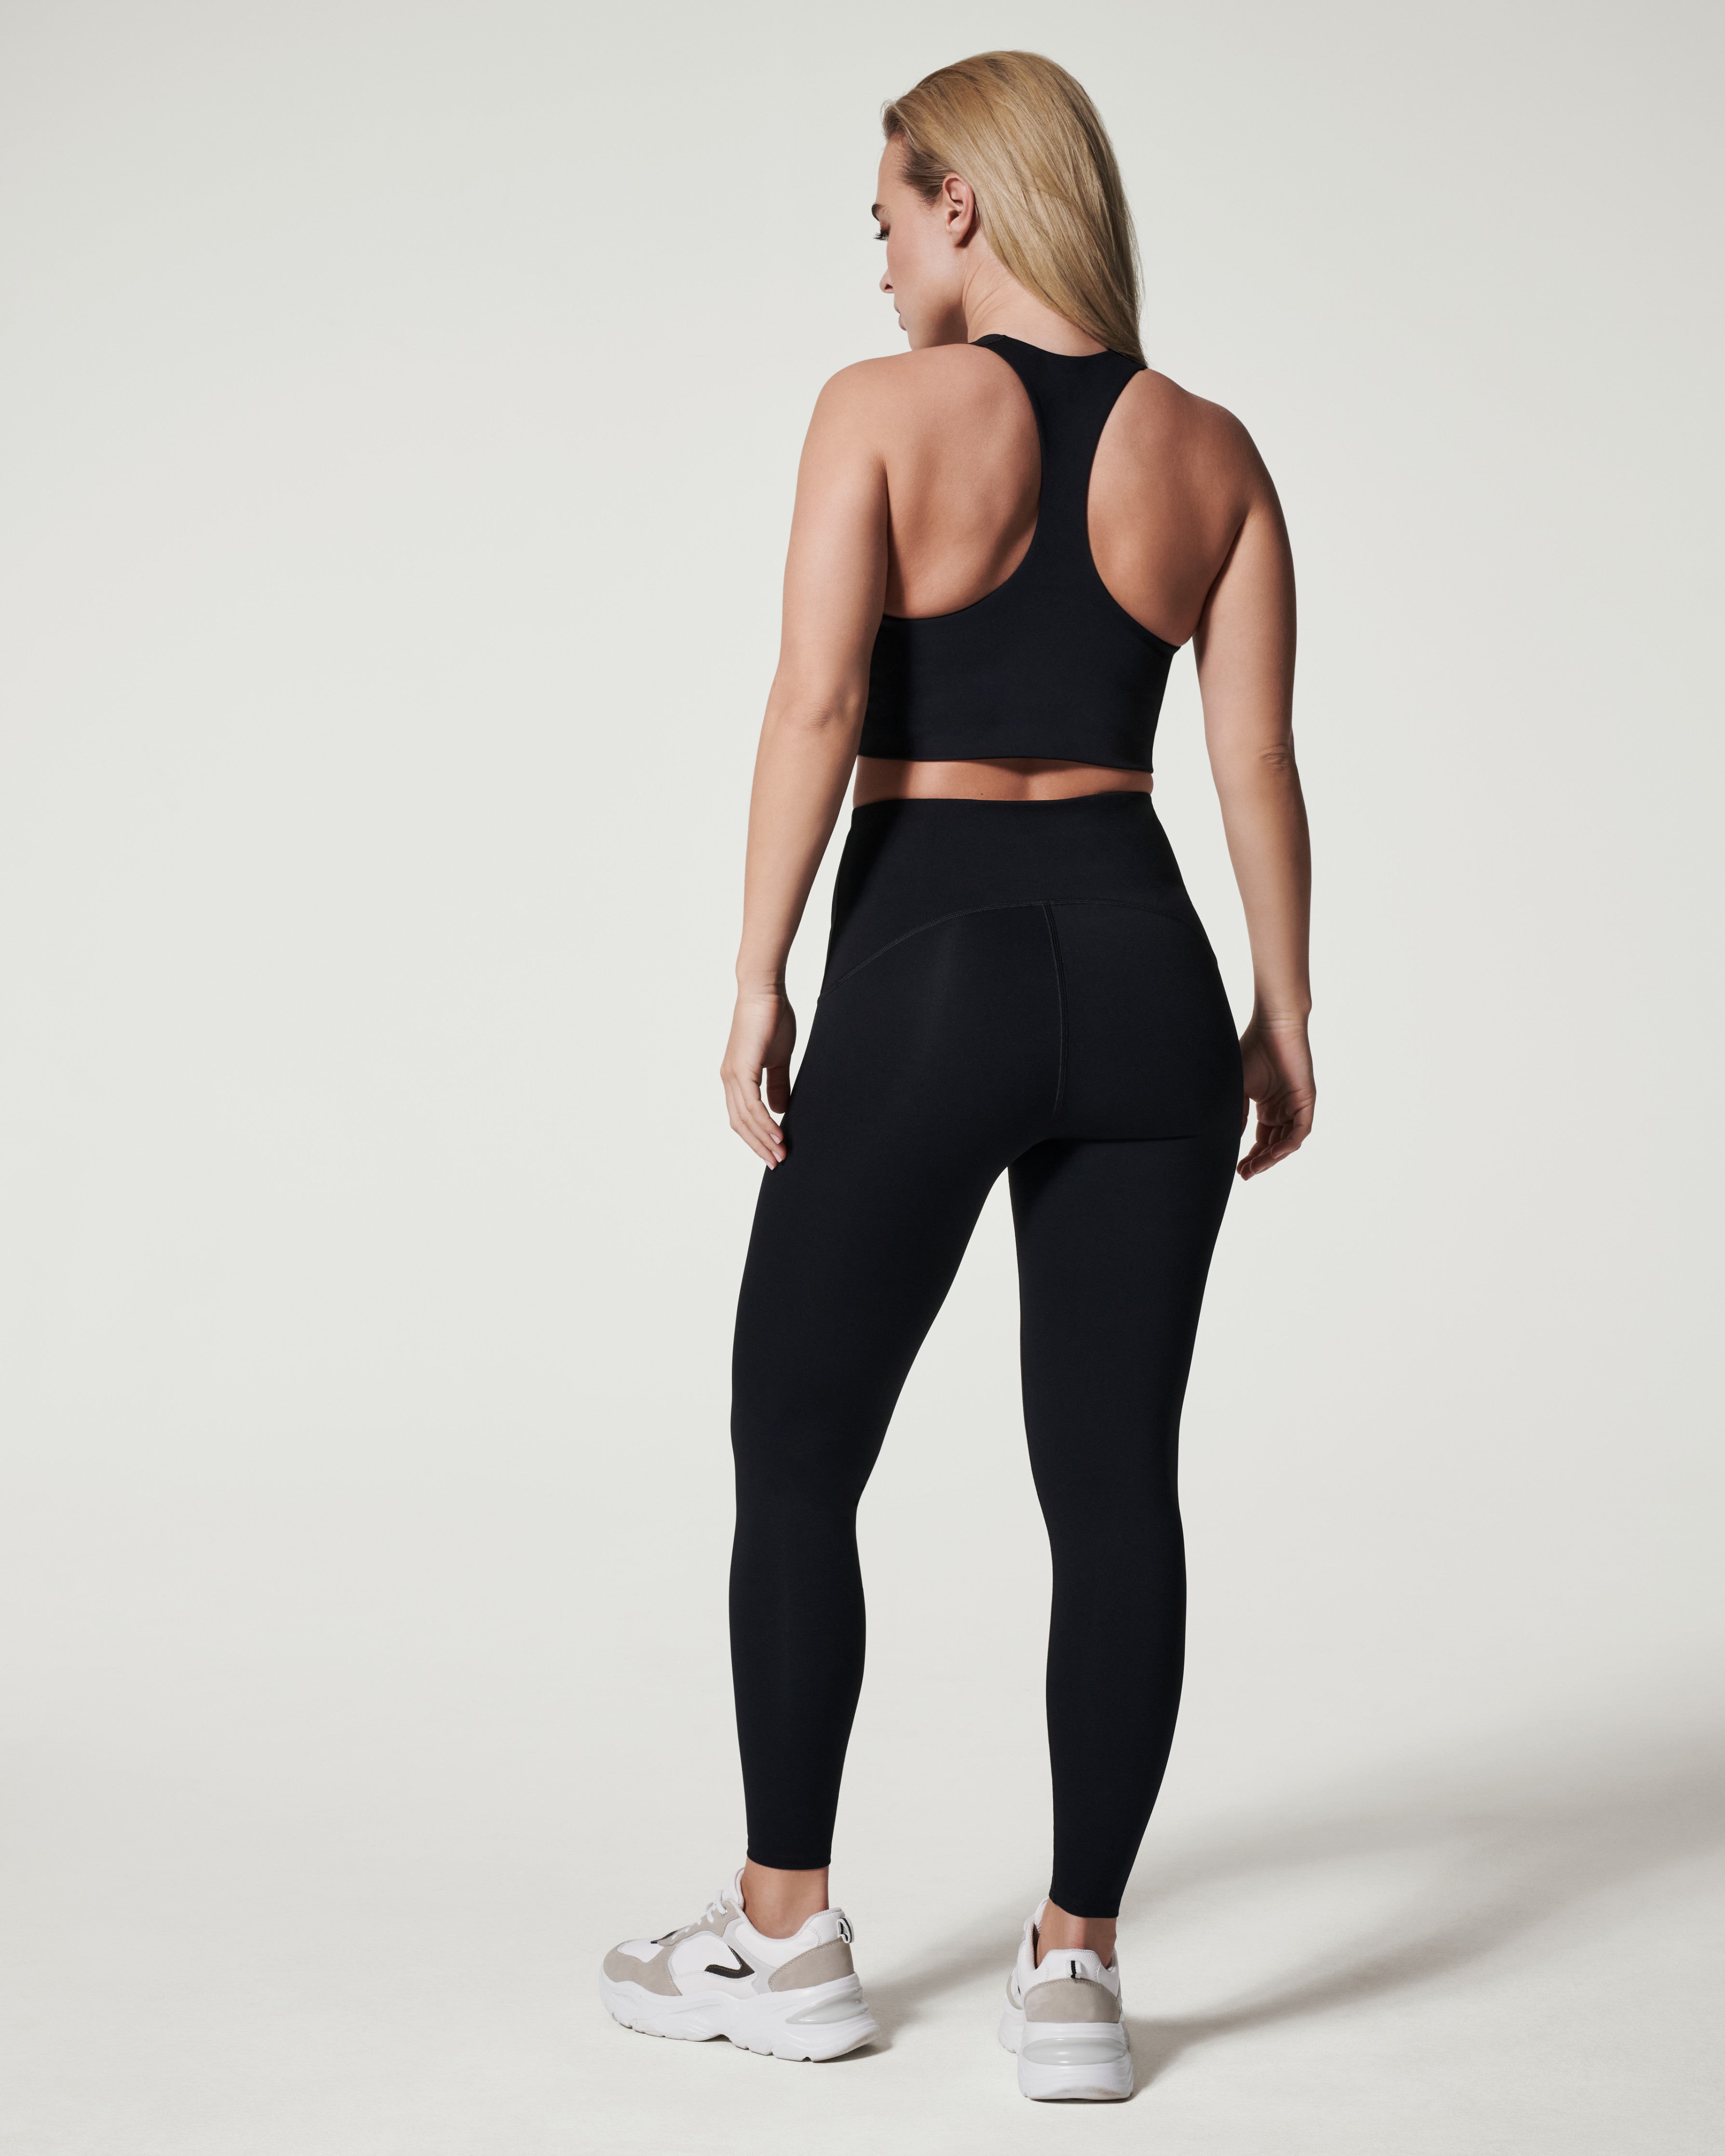 Shop Women's Booty Support Tights and Leggings